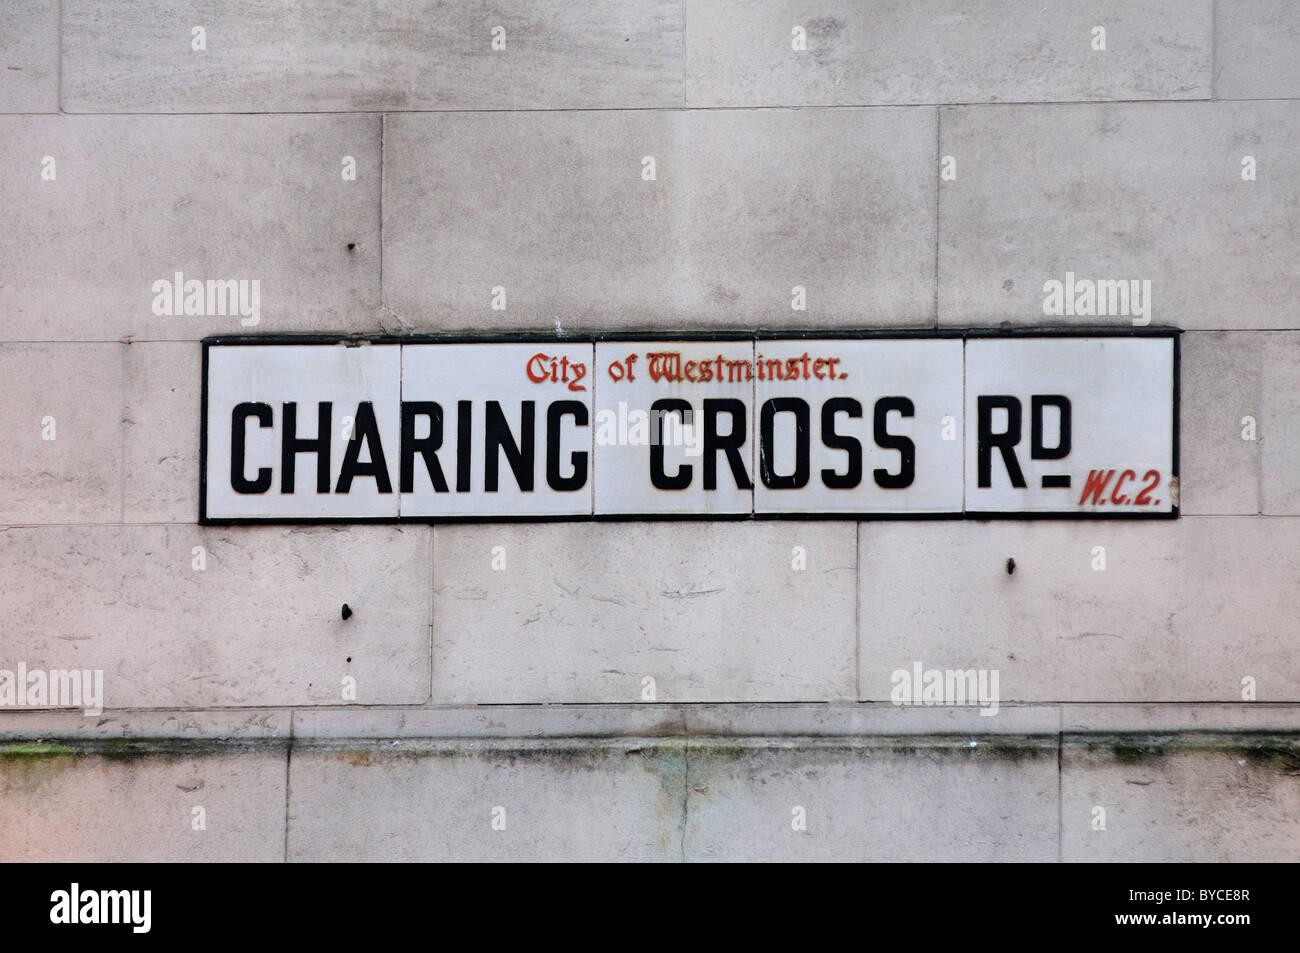 Charing Cross Rd Street Sign, Londres, Angleterre, Royaume-Uni Banque D'Images